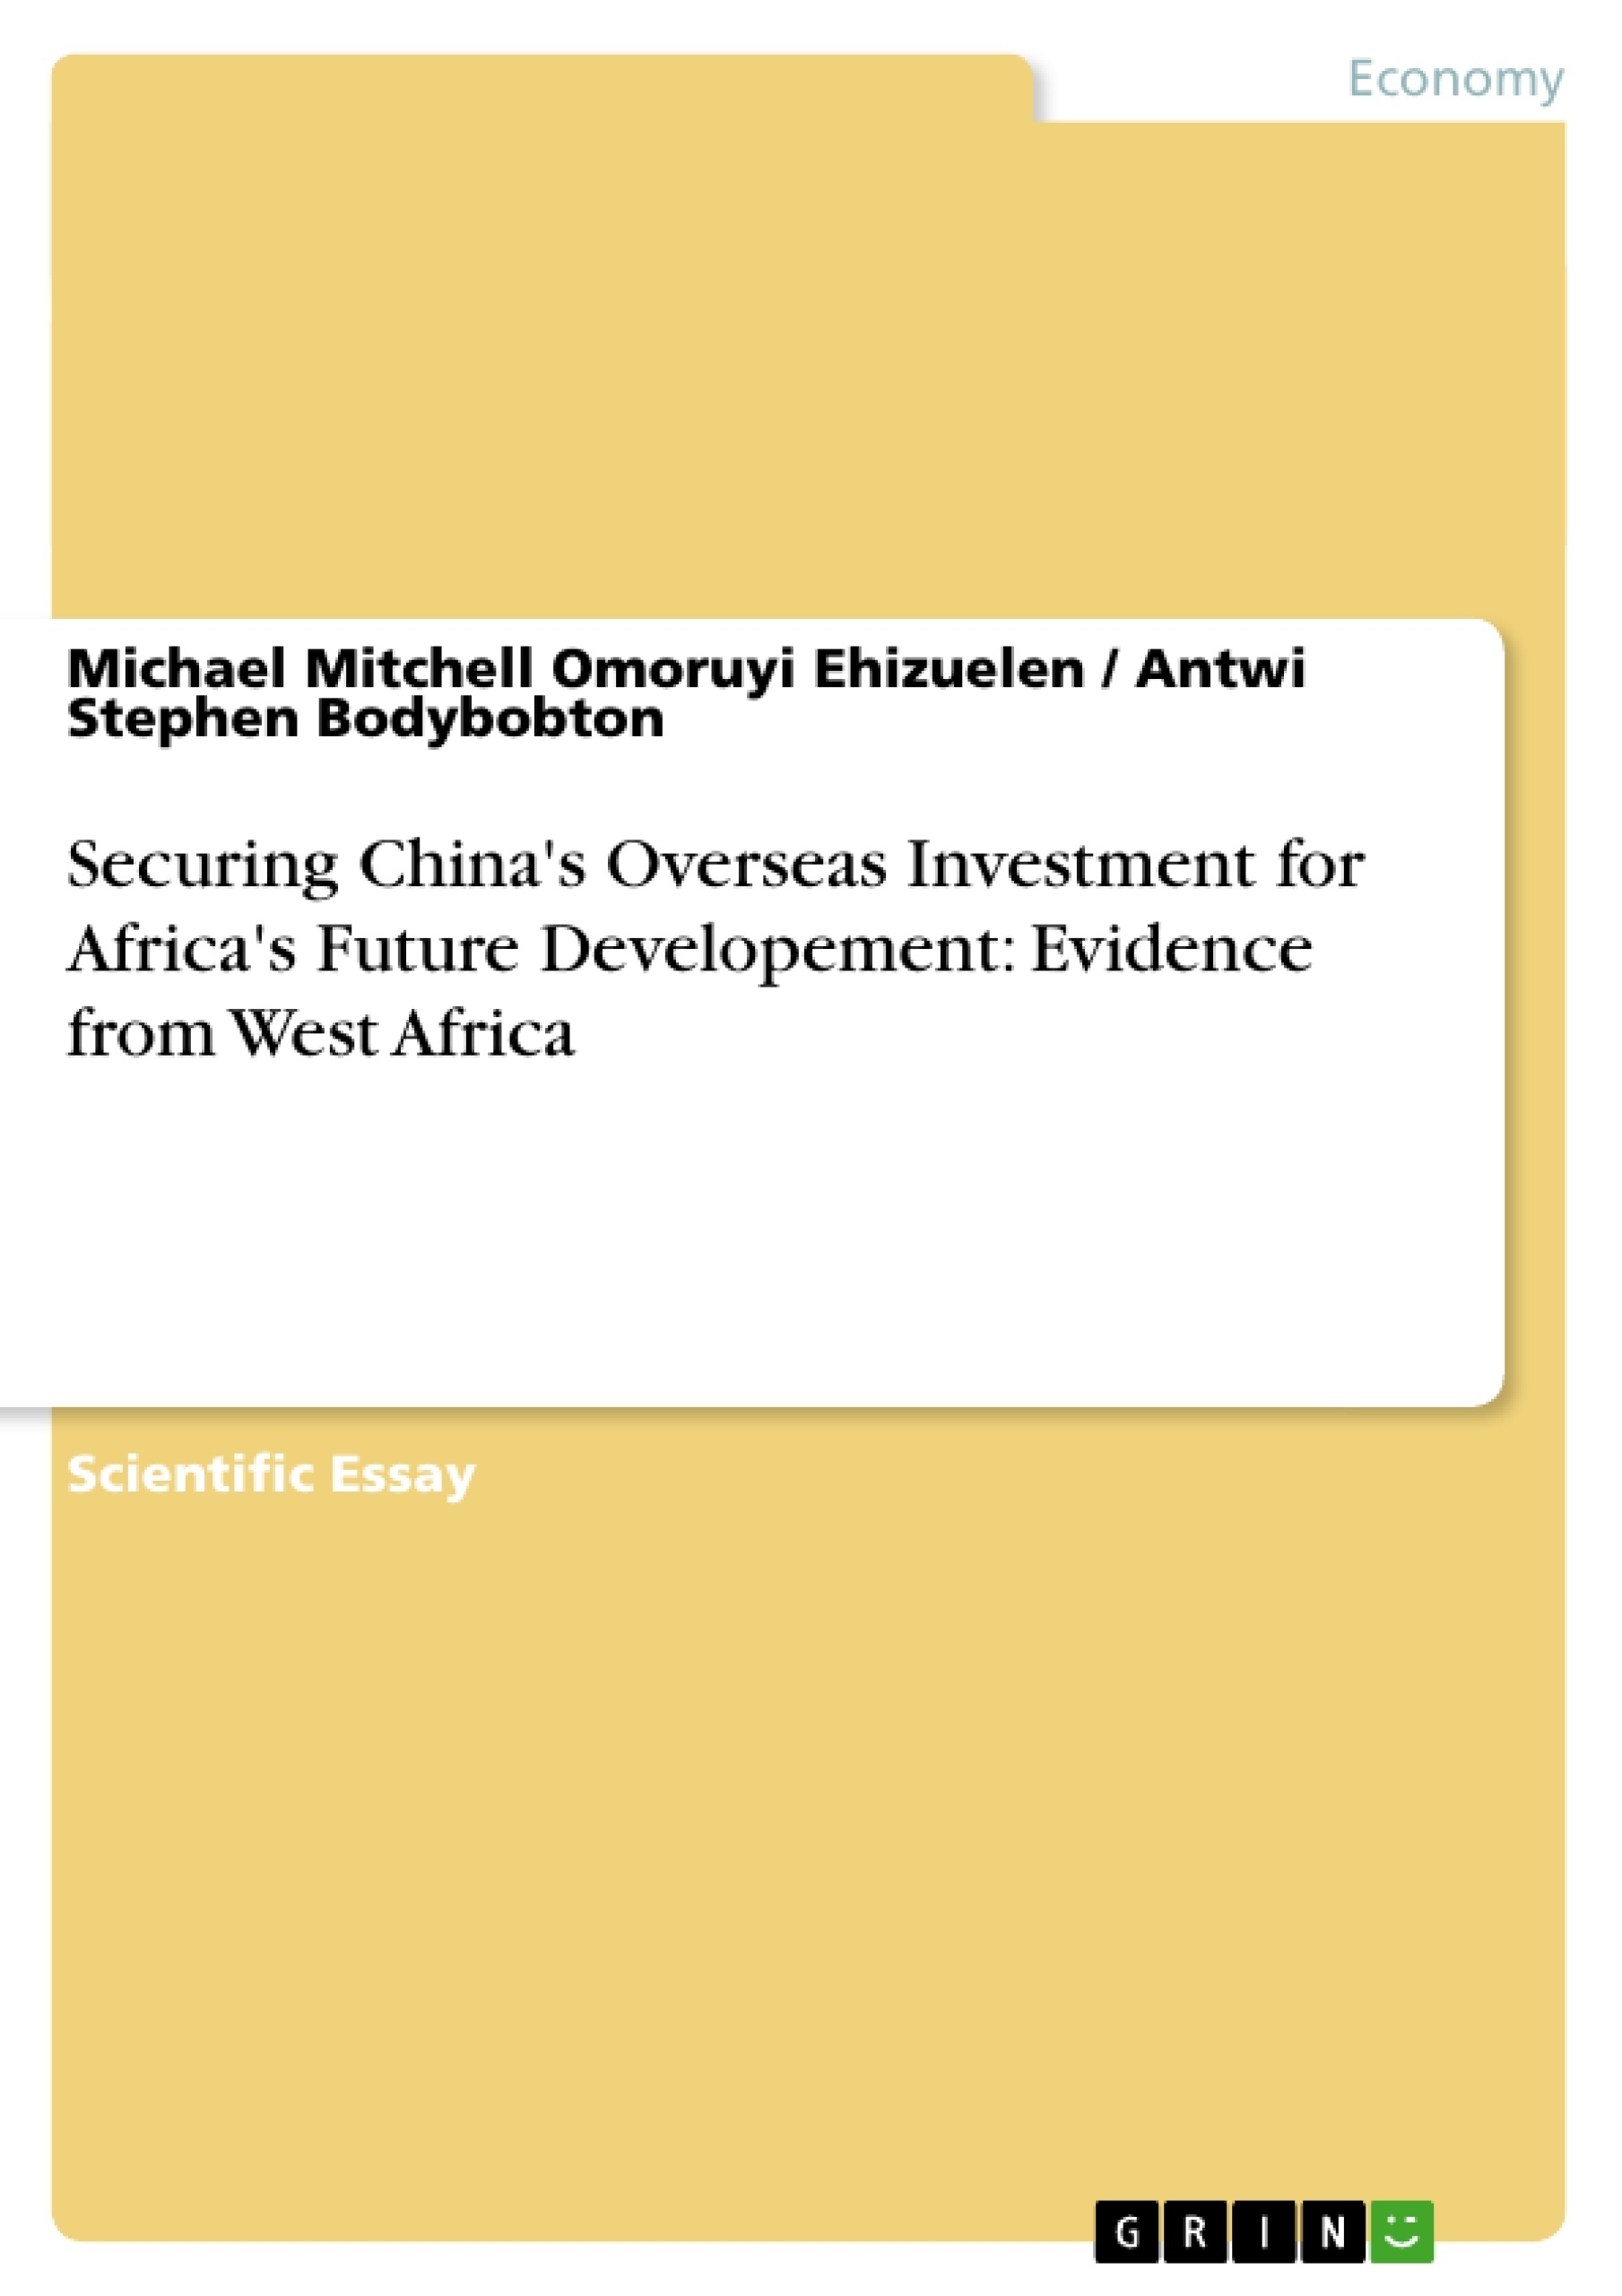 Title: Securing China's Overseas Investment for Africa's Future Developement: Evidence from West Africa